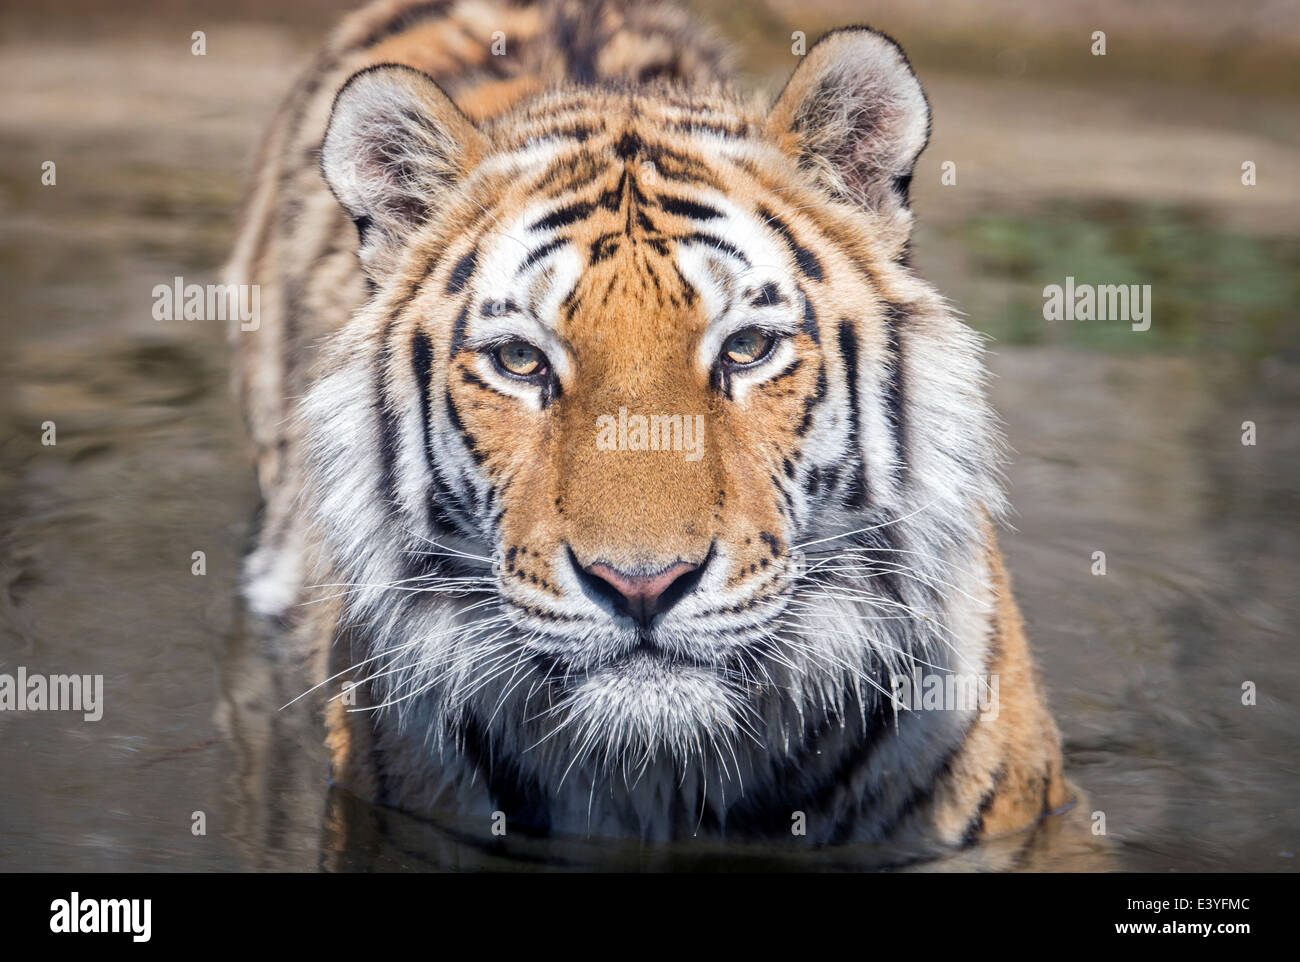 Male Amur tiger in water, looking at camera Stock Photo